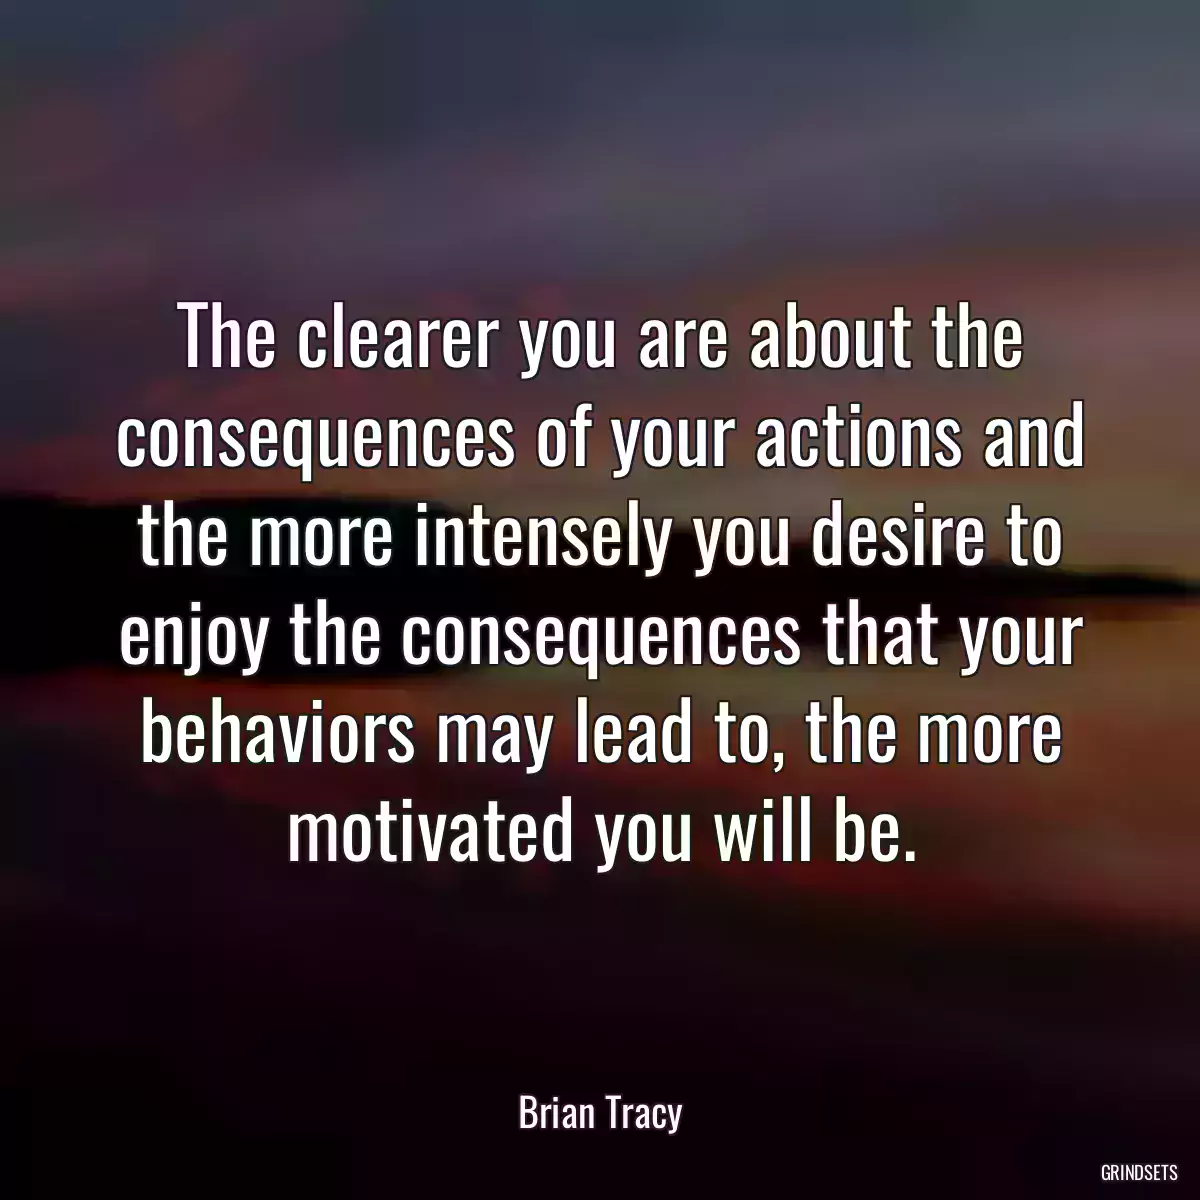 The clearer you are about the consequences of your actions and the more intensely you desire to enjoy the consequences that your behaviors may lead to, the more motivated you will be.